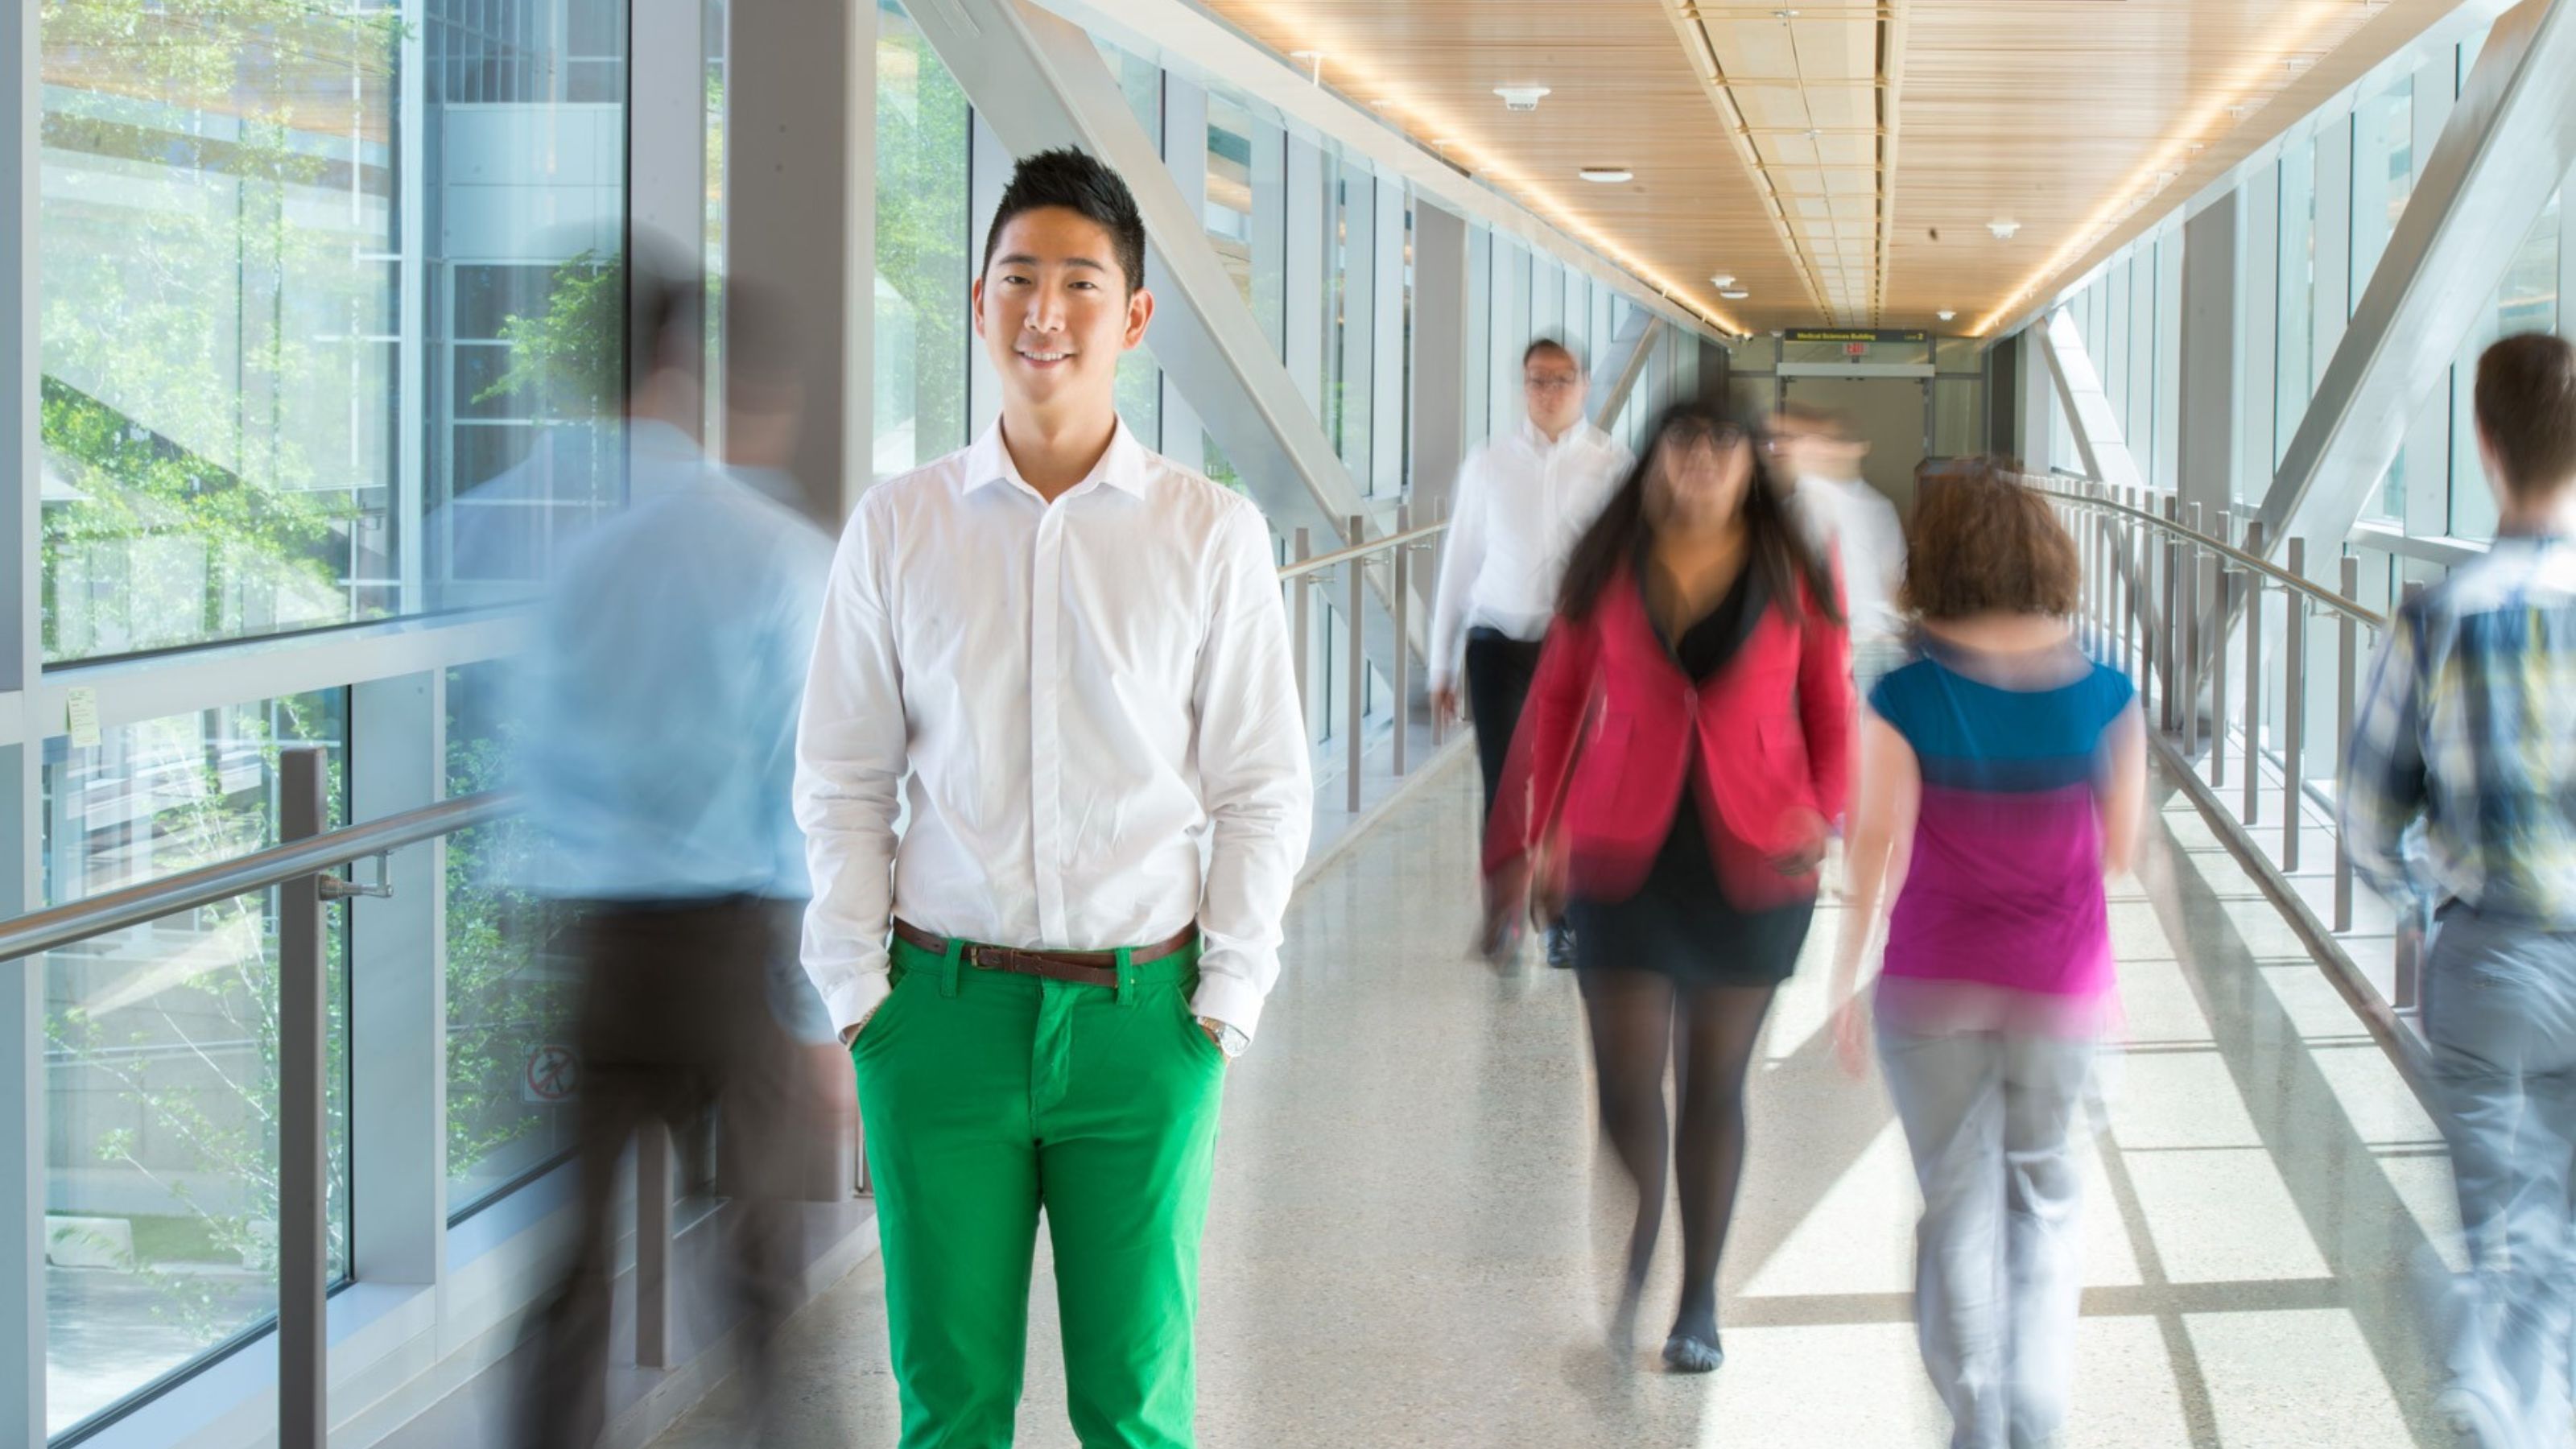 A student stands among a number of blurred individuals